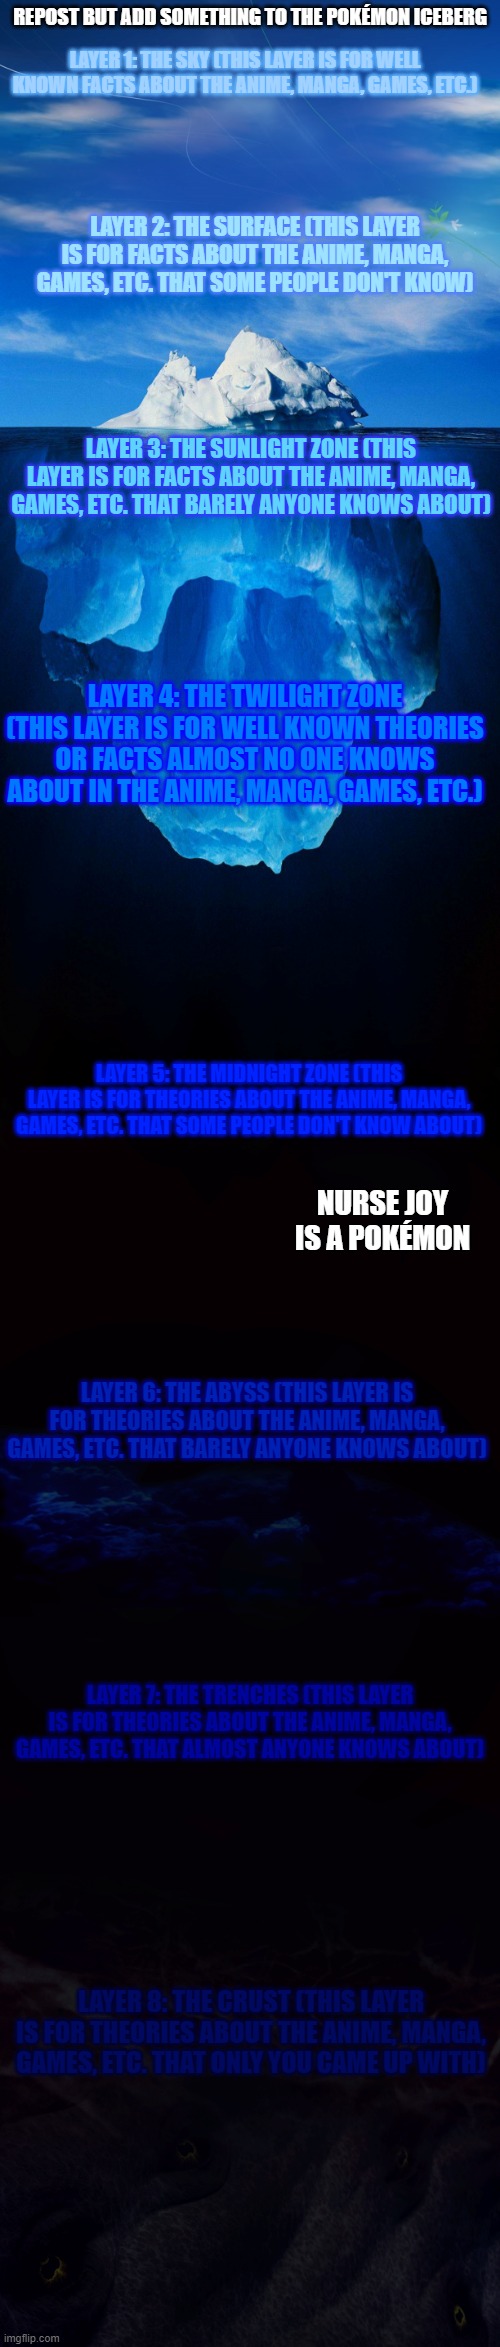 Repost but add to the iceberg. |  REPOST BUT ADD SOMETHING TO THE POKÉMON ICEBERG; LAYER 1: THE SKY (THIS LAYER IS FOR WELL KNOWN FACTS ABOUT THE ANIME, MANGA, GAMES, ETC.); LAYER 2: THE SURFACE (THIS LAYER IS FOR FACTS ABOUT THE ANIME, MANGA, GAMES, ETC. THAT SOME PEOPLE DON'T KNOW); LAYER 3: THE SUNLIGHT ZONE (THIS LAYER IS FOR FACTS ABOUT THE ANIME, MANGA, GAMES, ETC. THAT BARELY ANYONE KNOWS ABOUT); LAYER 4: THE TWILIGHT ZONE (THIS LAYER IS FOR WELL KNOWN THEORIES OR FACTS ALMOST NO ONE KNOWS ABOUT IN THE ANIME, MANGA, GAMES, ETC.); LAYER 5: THE MIDNIGHT ZONE (THIS LAYER IS FOR THEORIES ABOUT THE ANIME, MANGA, GAMES, ETC. THAT SOME PEOPLE DON'T KNOW ABOUT); NURSE JOY IS A POKÉMON; LAYER 6: THE ABYSS (THIS LAYER IS FOR THEORIES ABOUT THE ANIME, MANGA, GAMES, ETC. THAT BARELY ANYONE KNOWS ABOUT); LAYER 7: THE TRENCHES (THIS LAYER IS FOR THEORIES ABOUT THE ANIME, MANGA, GAMES, ETC. THAT ALMOST ANYONE KNOWS ABOUT); LAYER 8: THE CRUST (THIS LAYER IS FOR THEORIES ABOUT THE ANIME, MANGA, GAMES, ETC. THAT ONLY YOU CAME UP WITH) | image tagged in extended iceberg,iceberg,pokemon,memes,iceberg levels tiers,why are you reading this | made w/ Imgflip meme maker